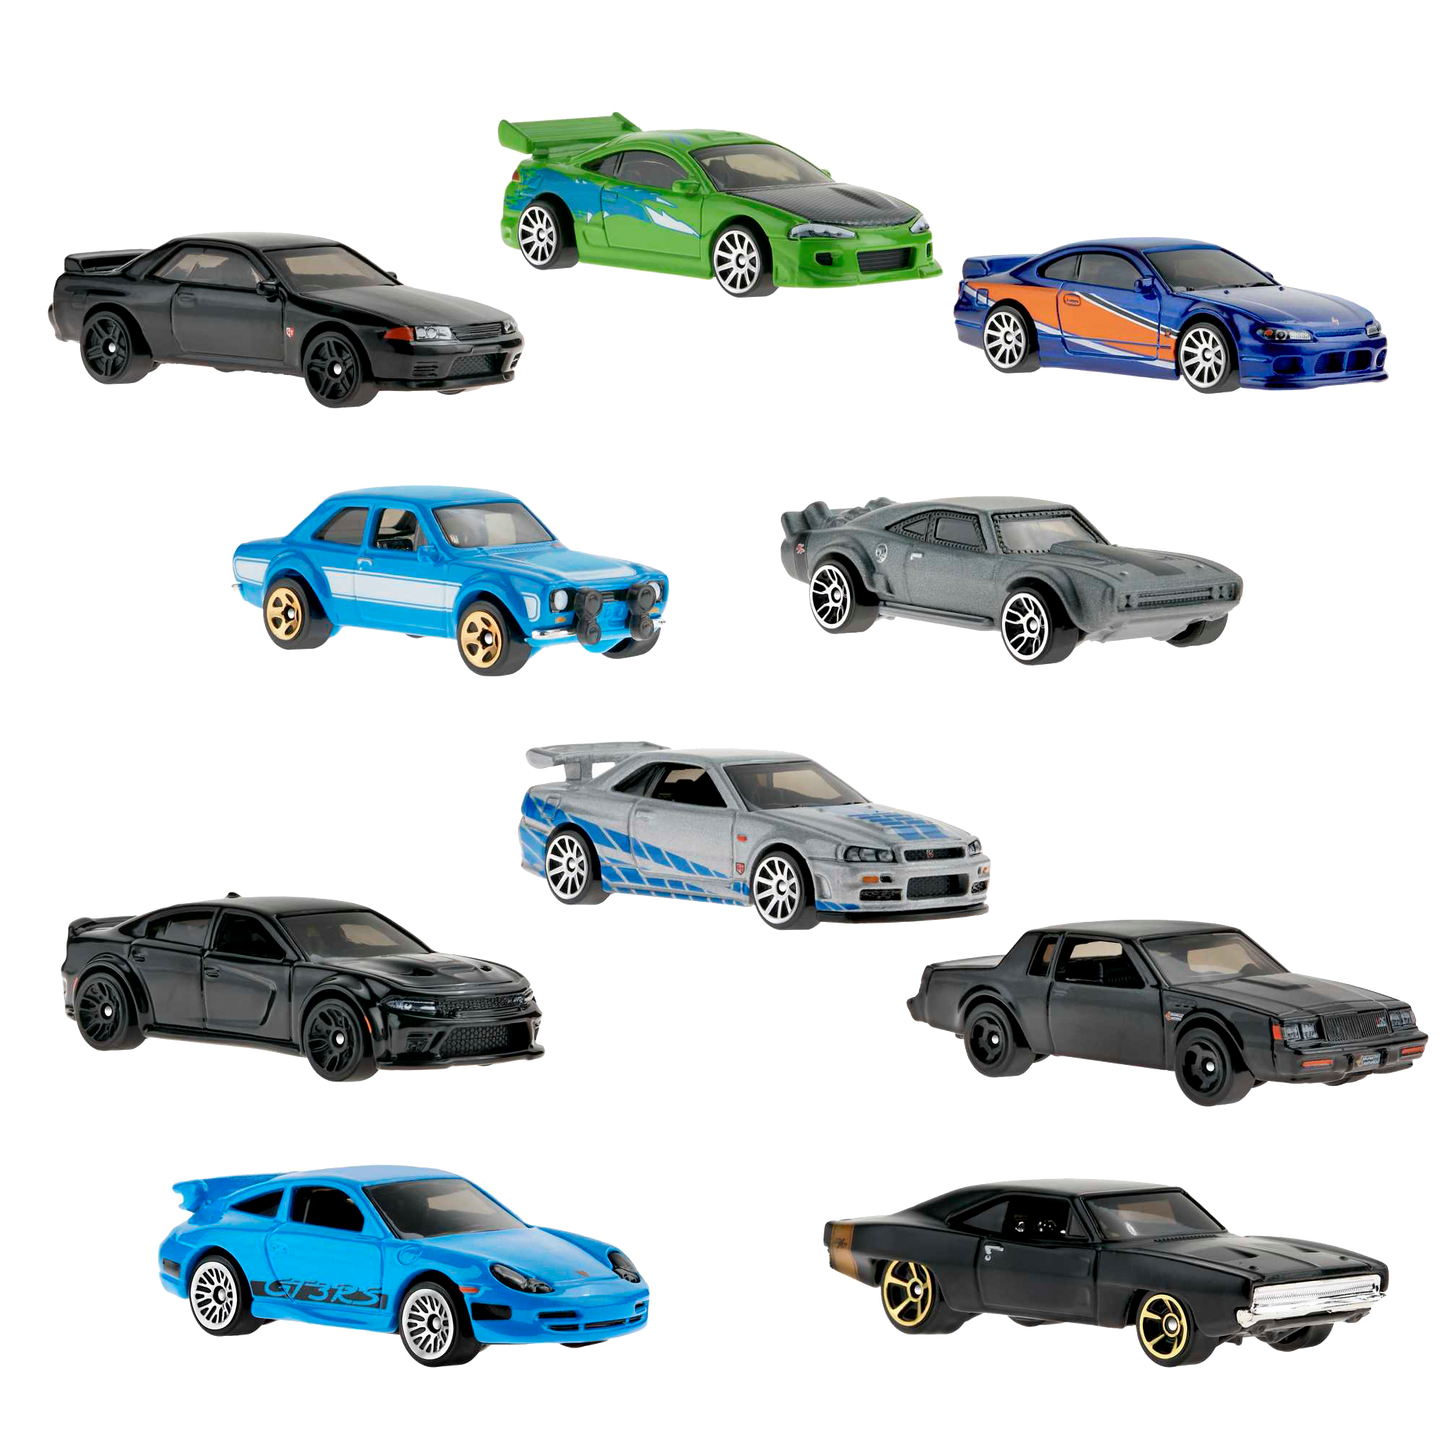 Hot Wheels Fast & Furious Themed 10-Pack of Vehicles